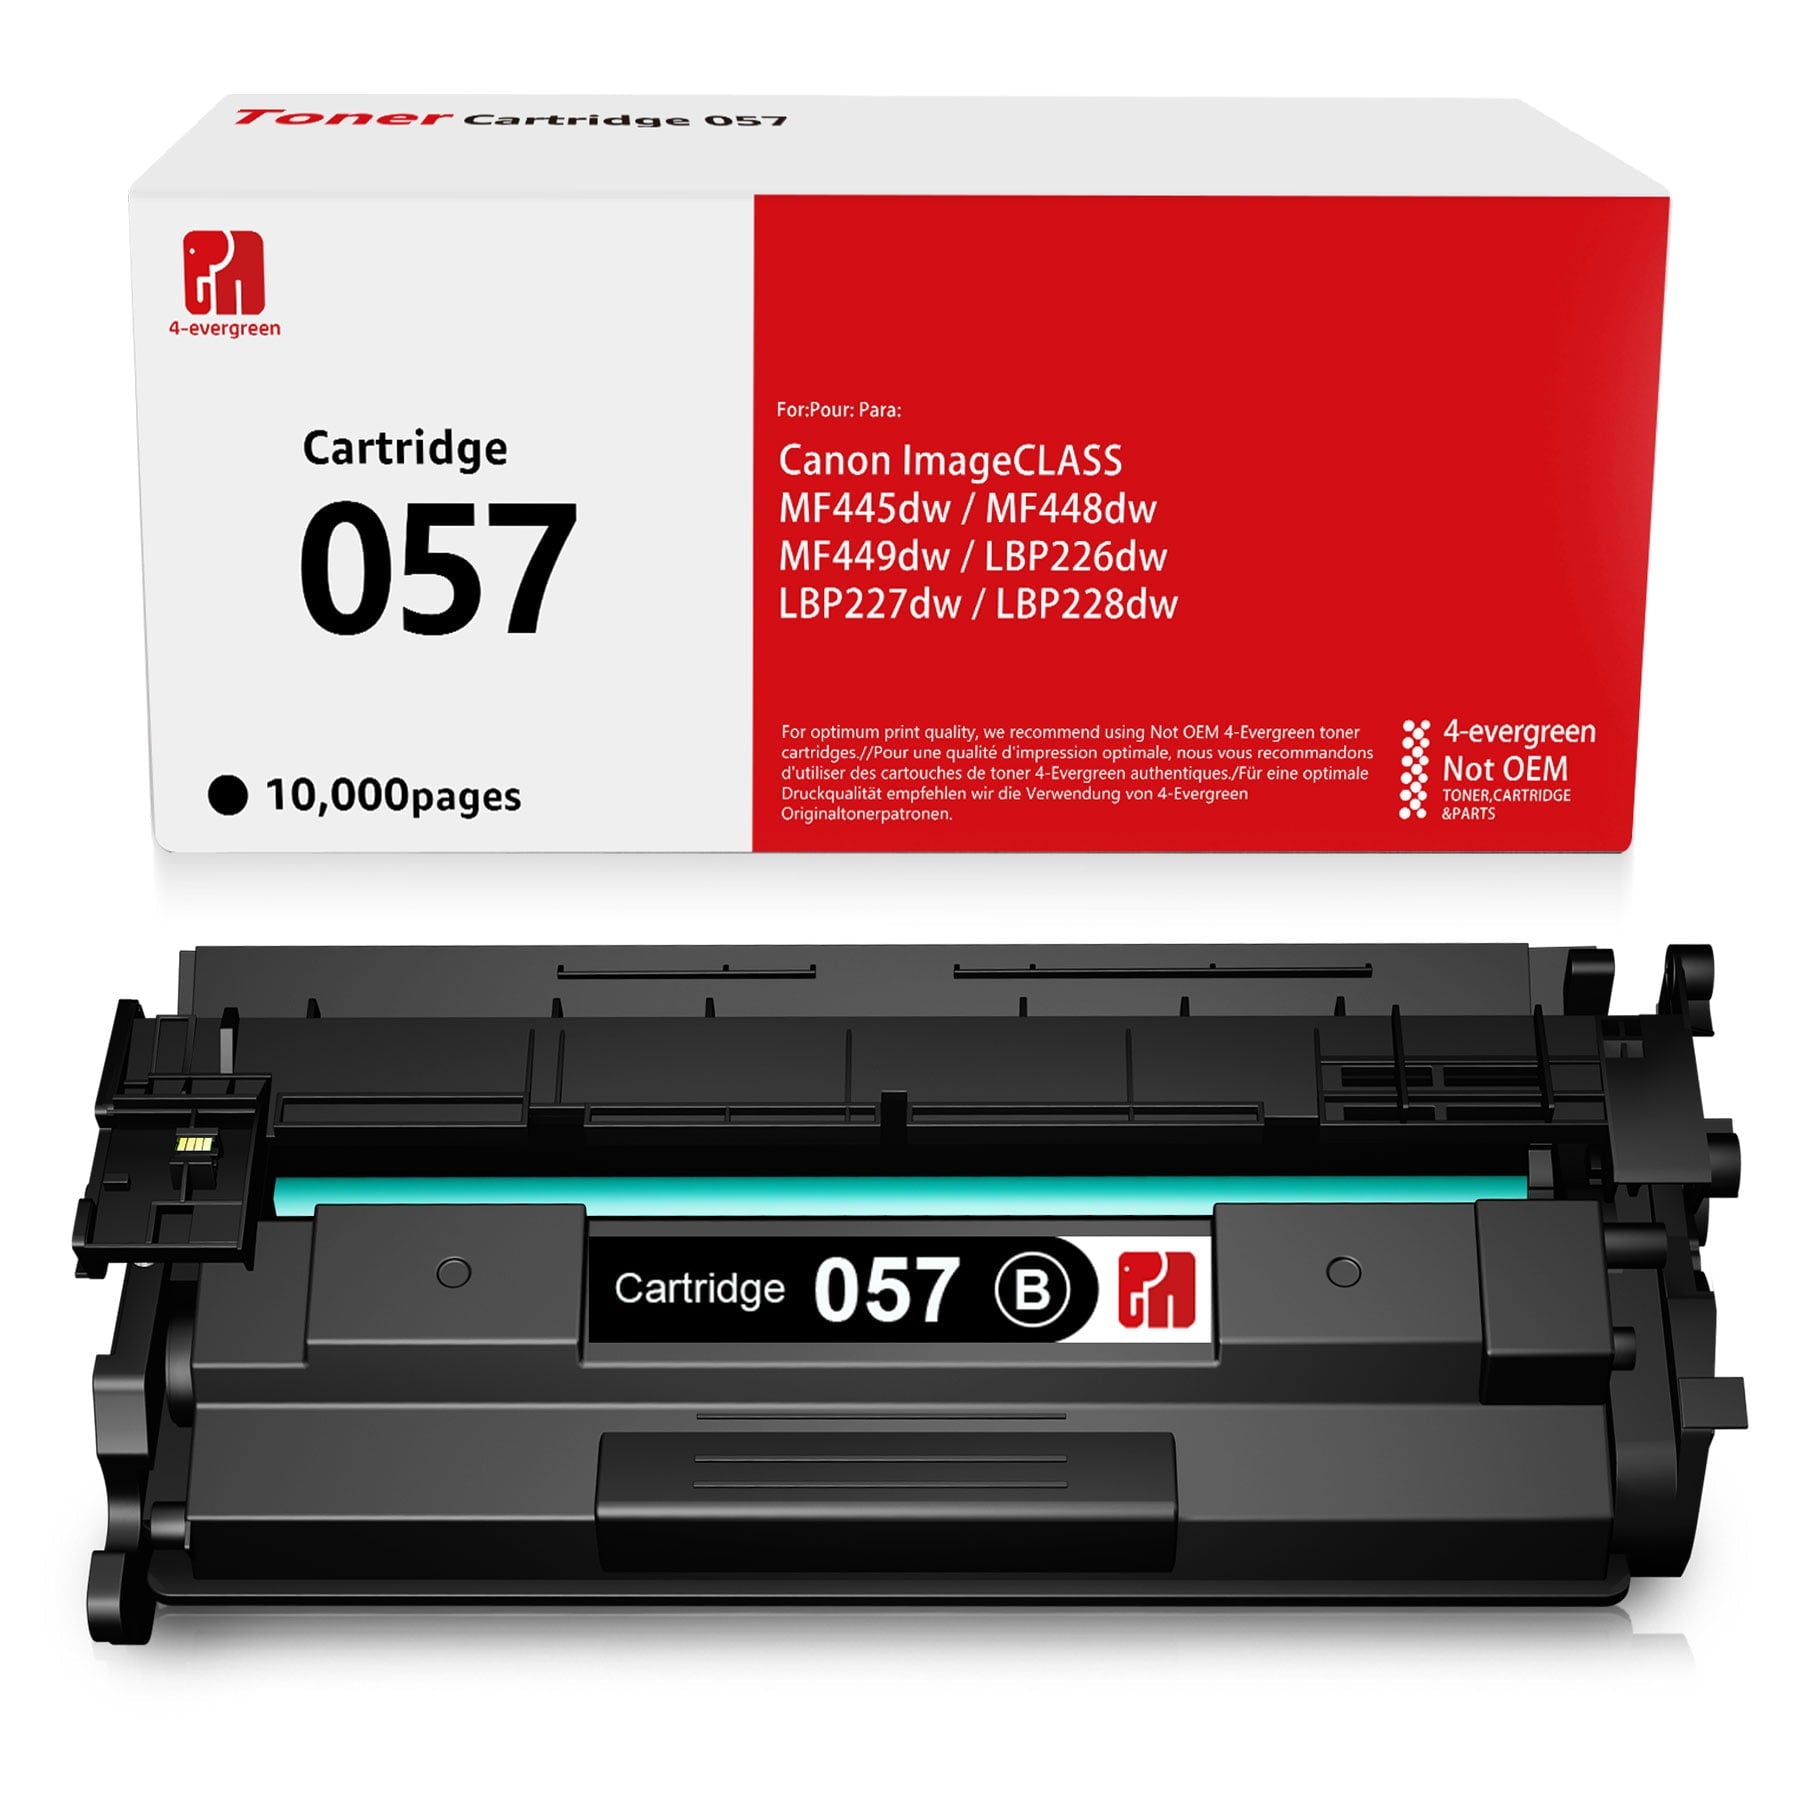 Ink & Toner-057H 057 Black High Yield Toner Cartridge 1-Pack Replacement for Canon Printer